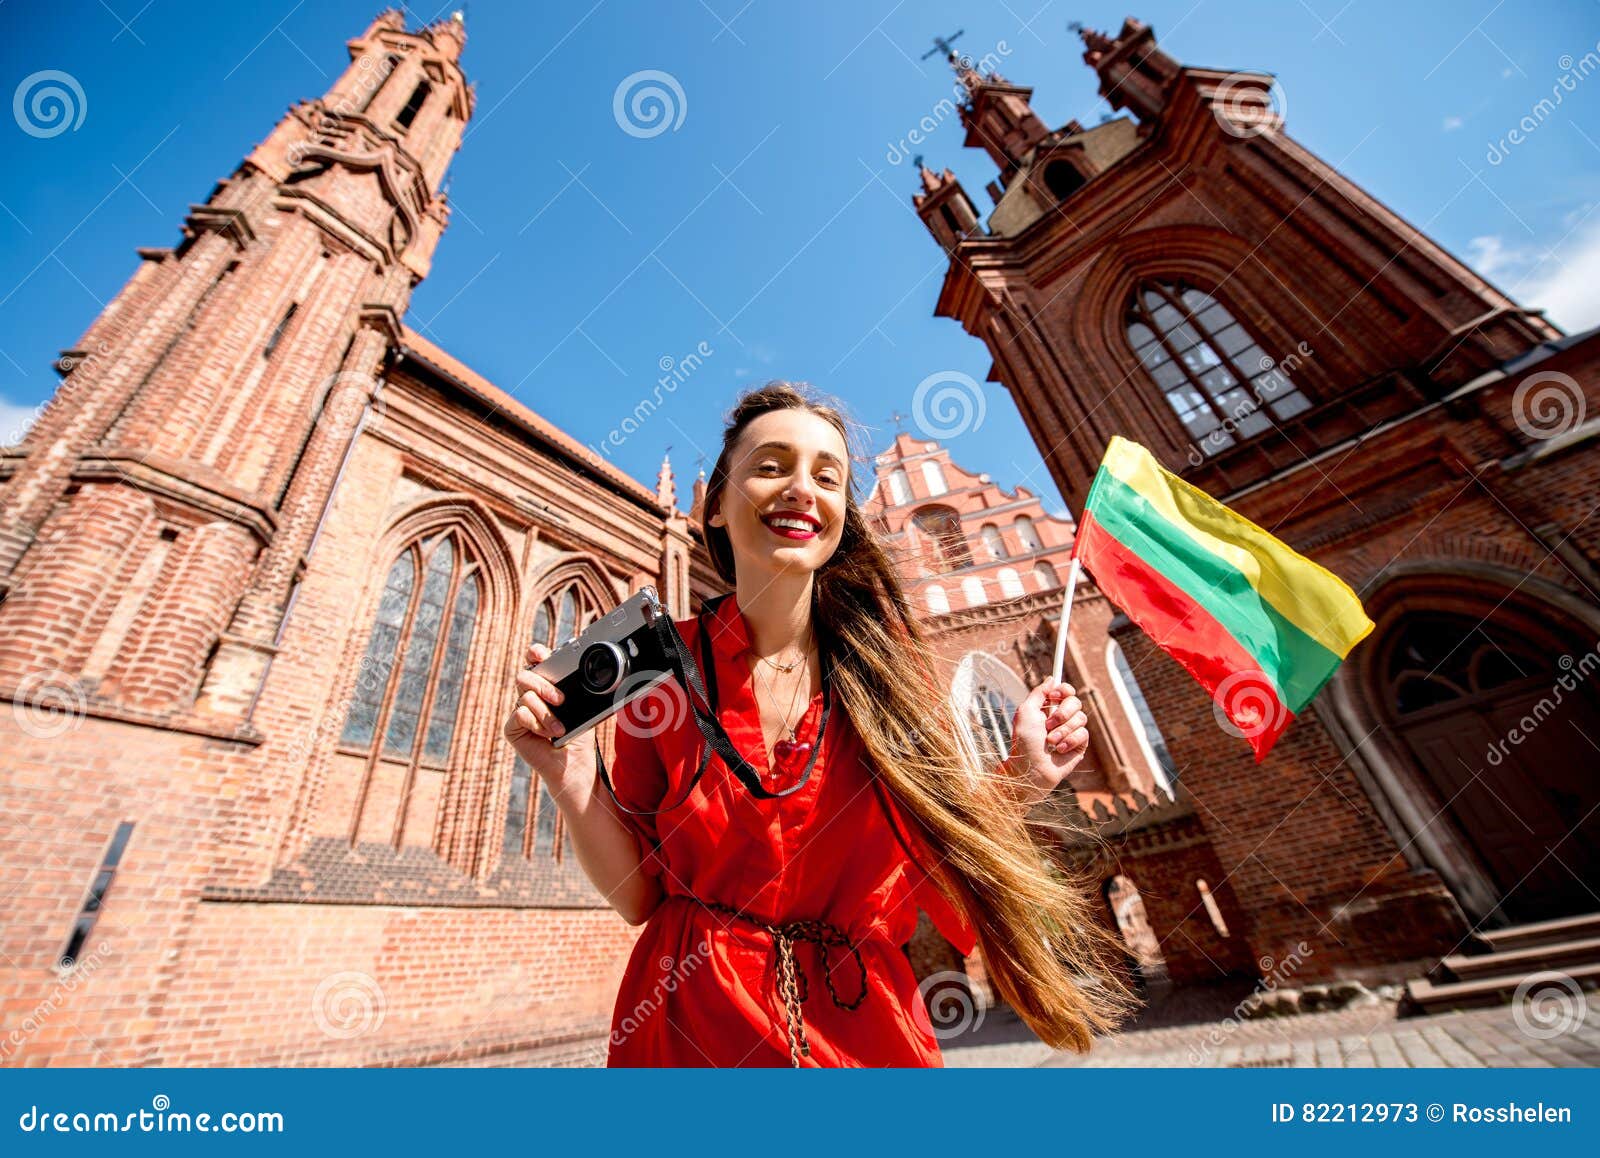 Woman traveling in Vilnius. Young female tourist with photo camera and lithuanian flag standing in front of the famous gothic church in the old town of Vilnius. Woman having great vacations in Lithuania